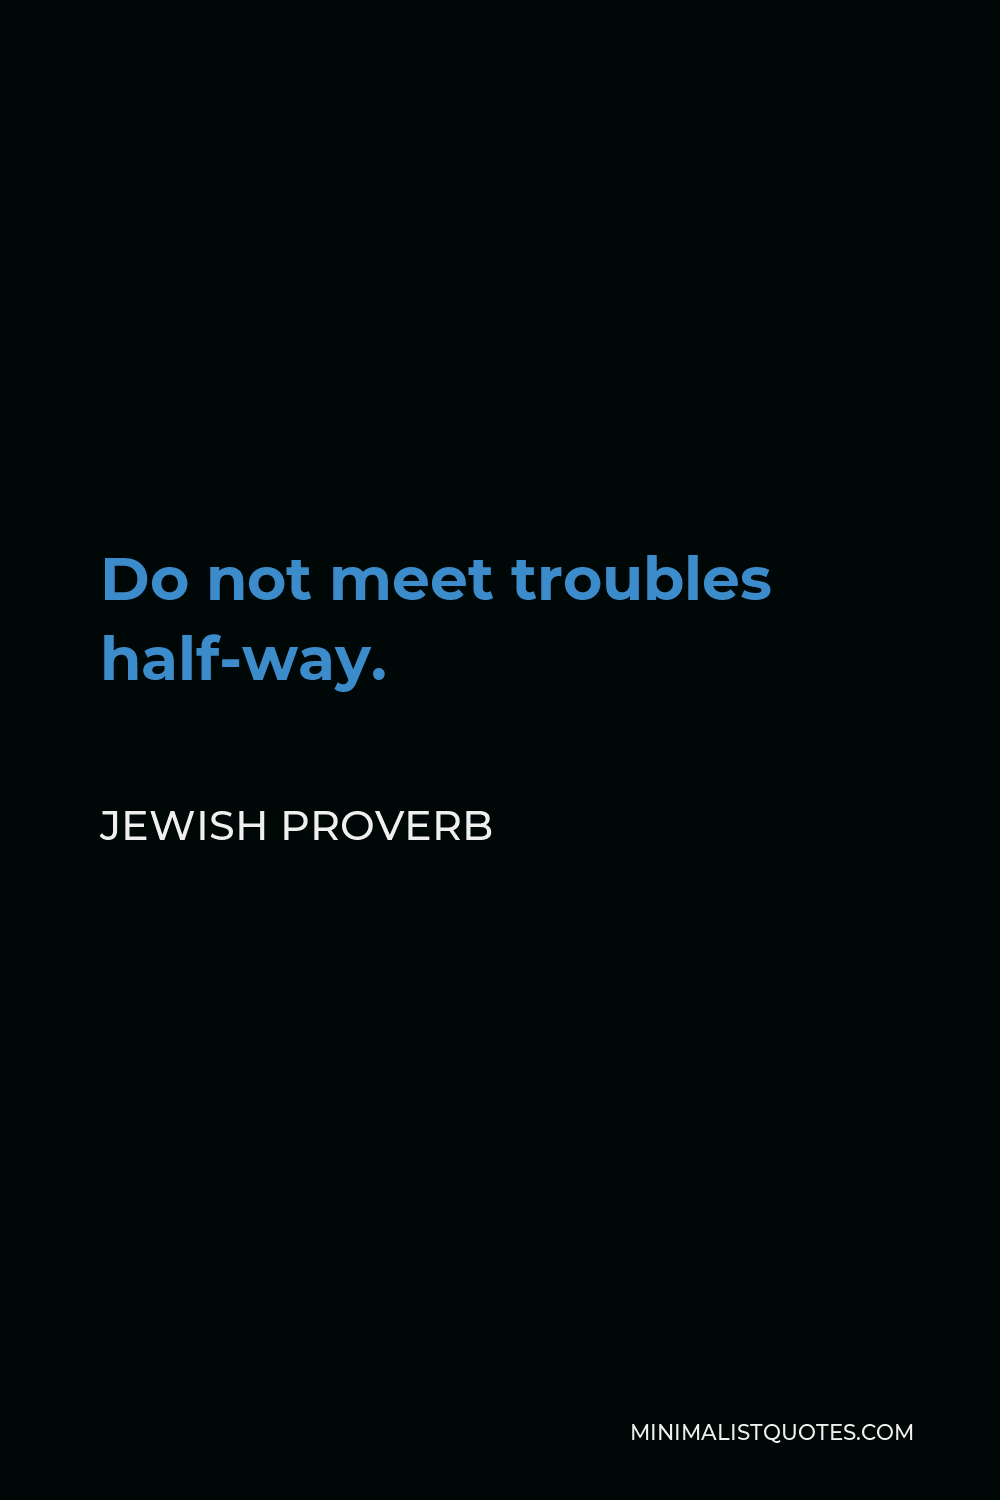 Jewish Proverb Quote - Do not meet troubles half-way.